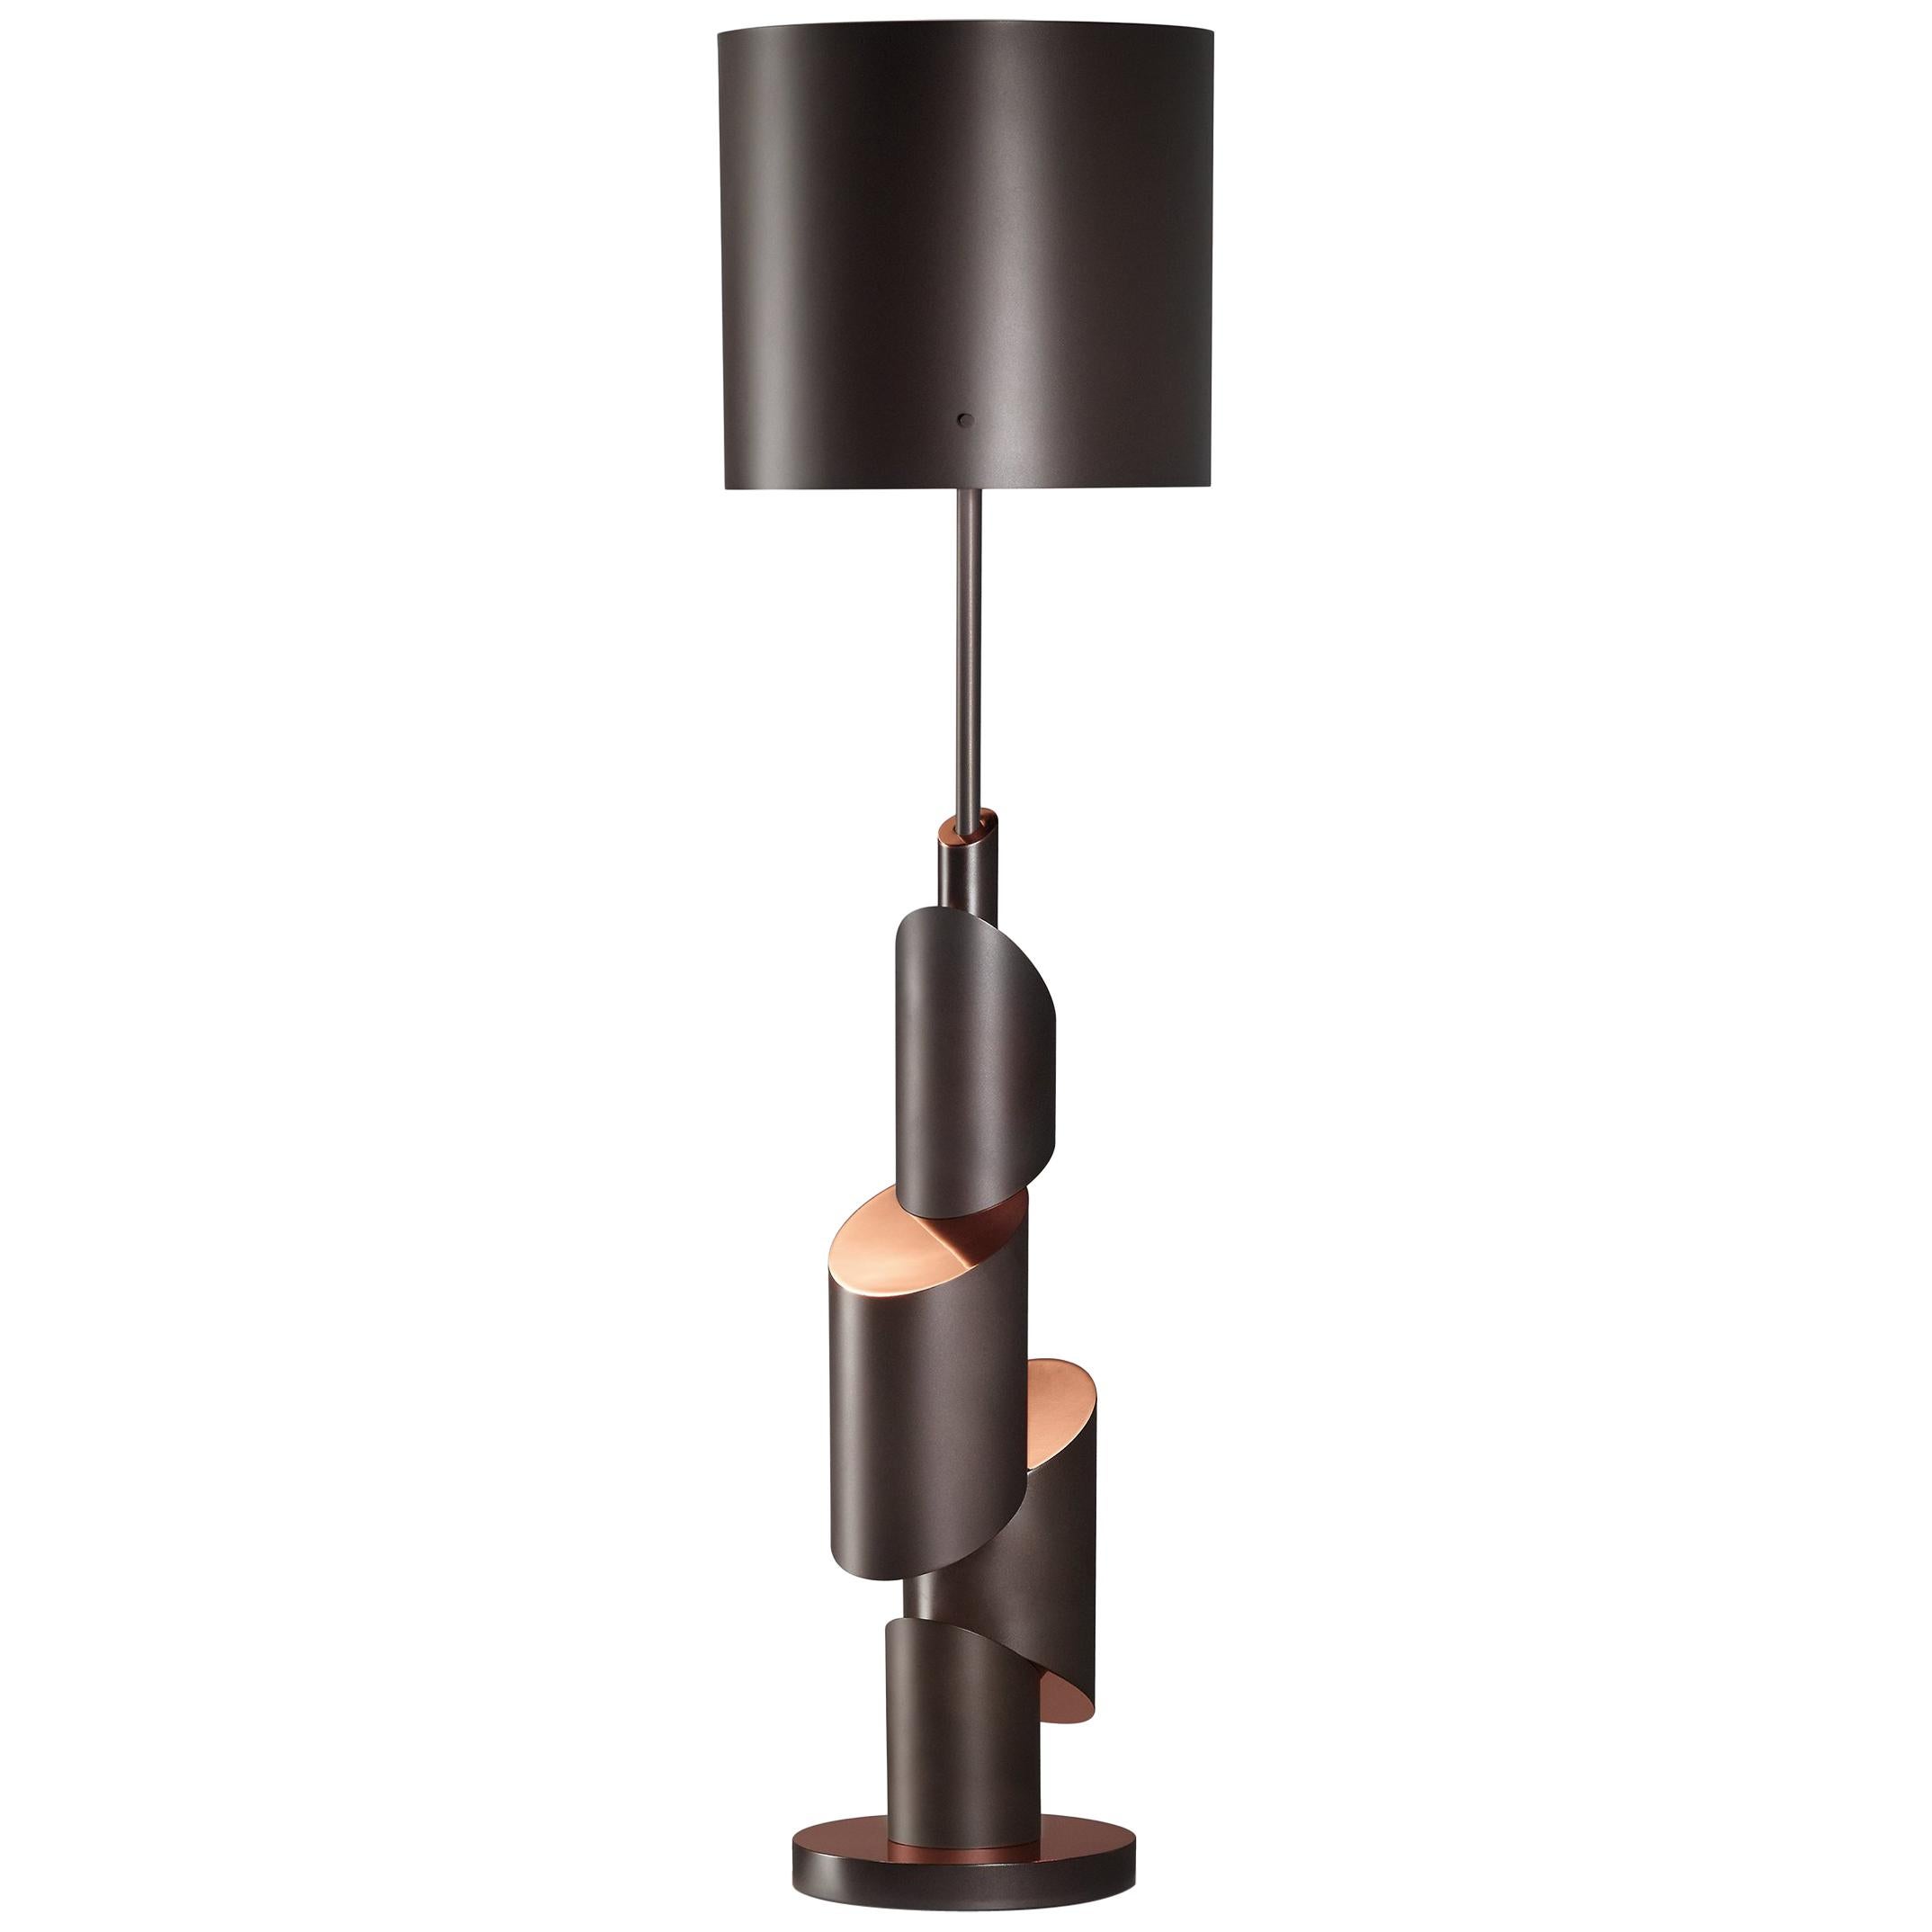 KRS 1 Table Lamp with Smoked Nickel and Copper Finish